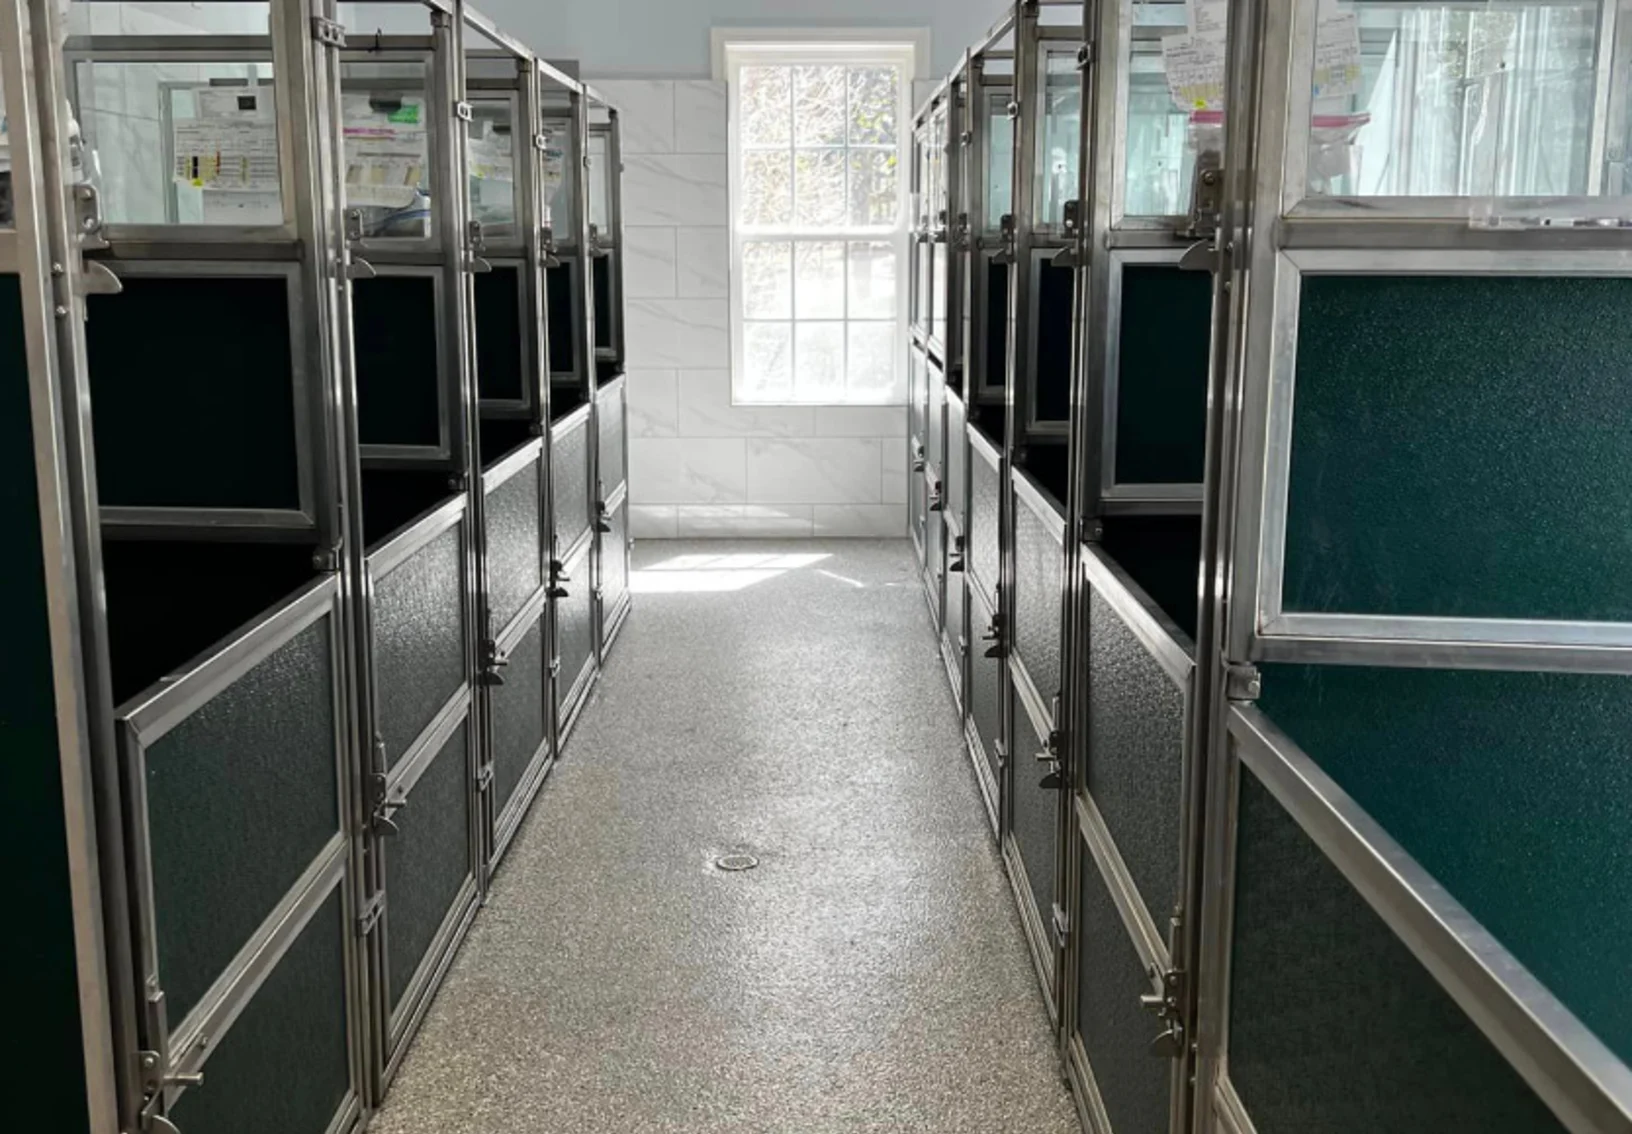 New boarding facility kennel area